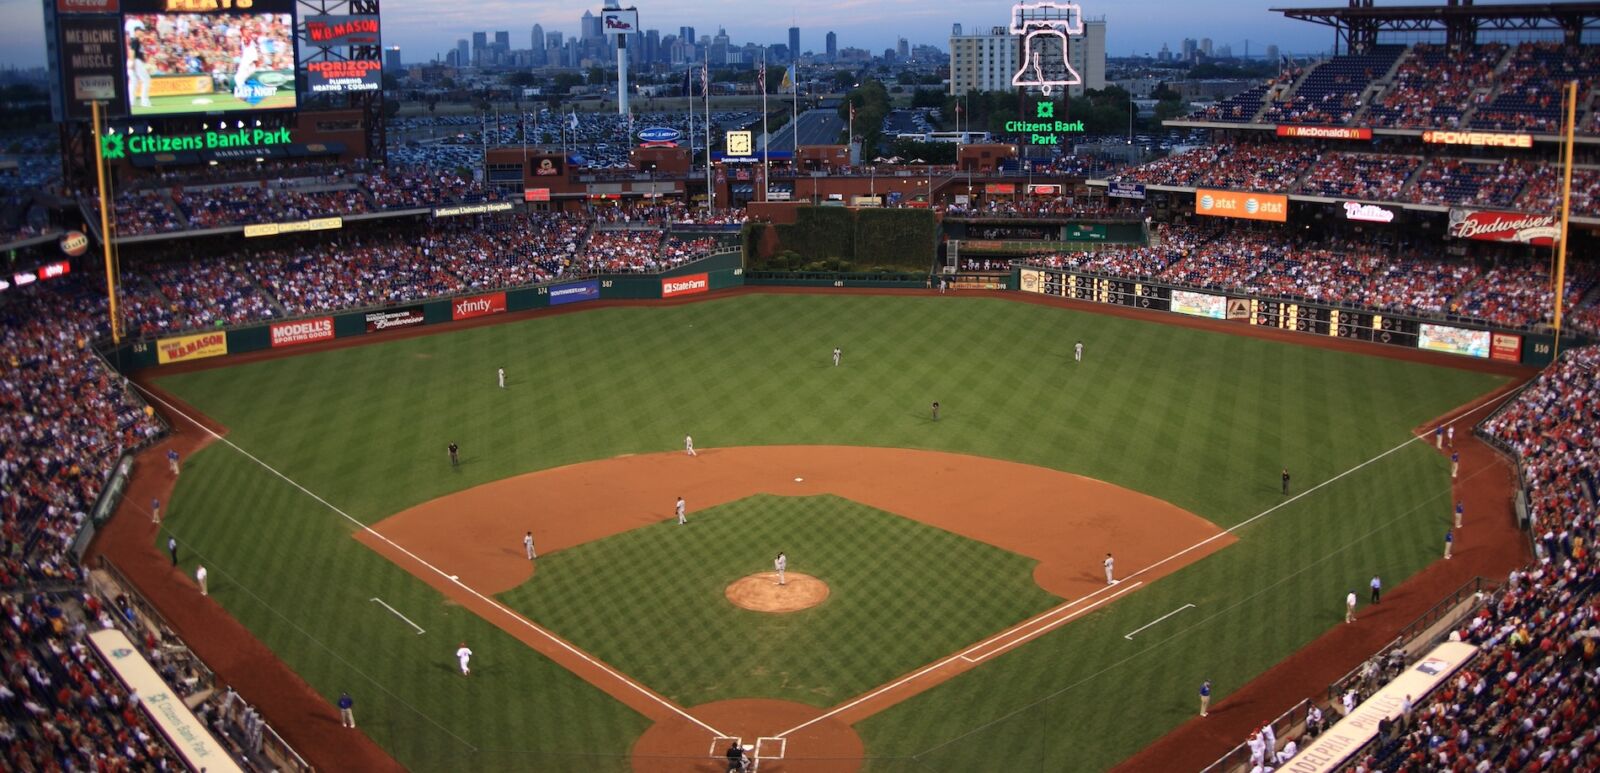 Citizens Bank Park is the home of the National League's Phillies, on September 7, 2010 in Philadelphia.